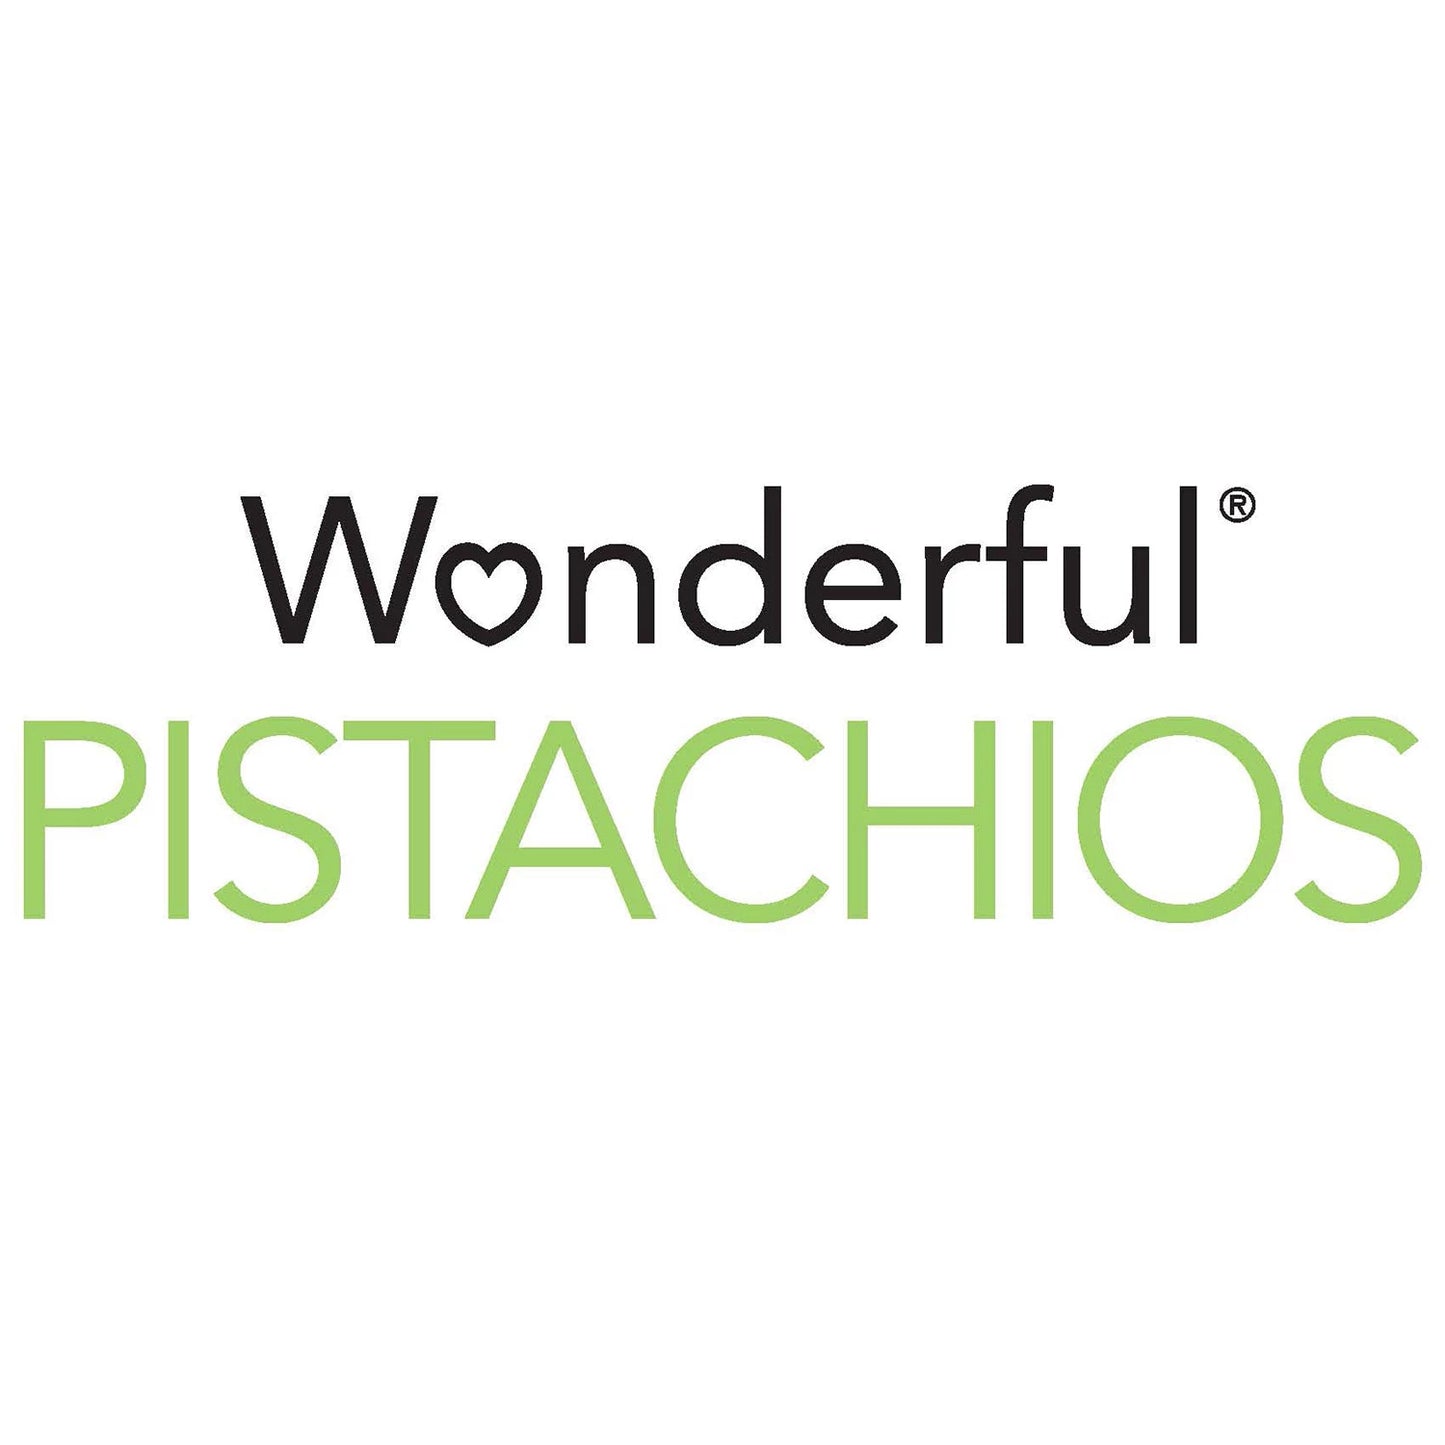 Wonderful Pistachios, Roasted and Salted (1.5 oz., 24 ct.)